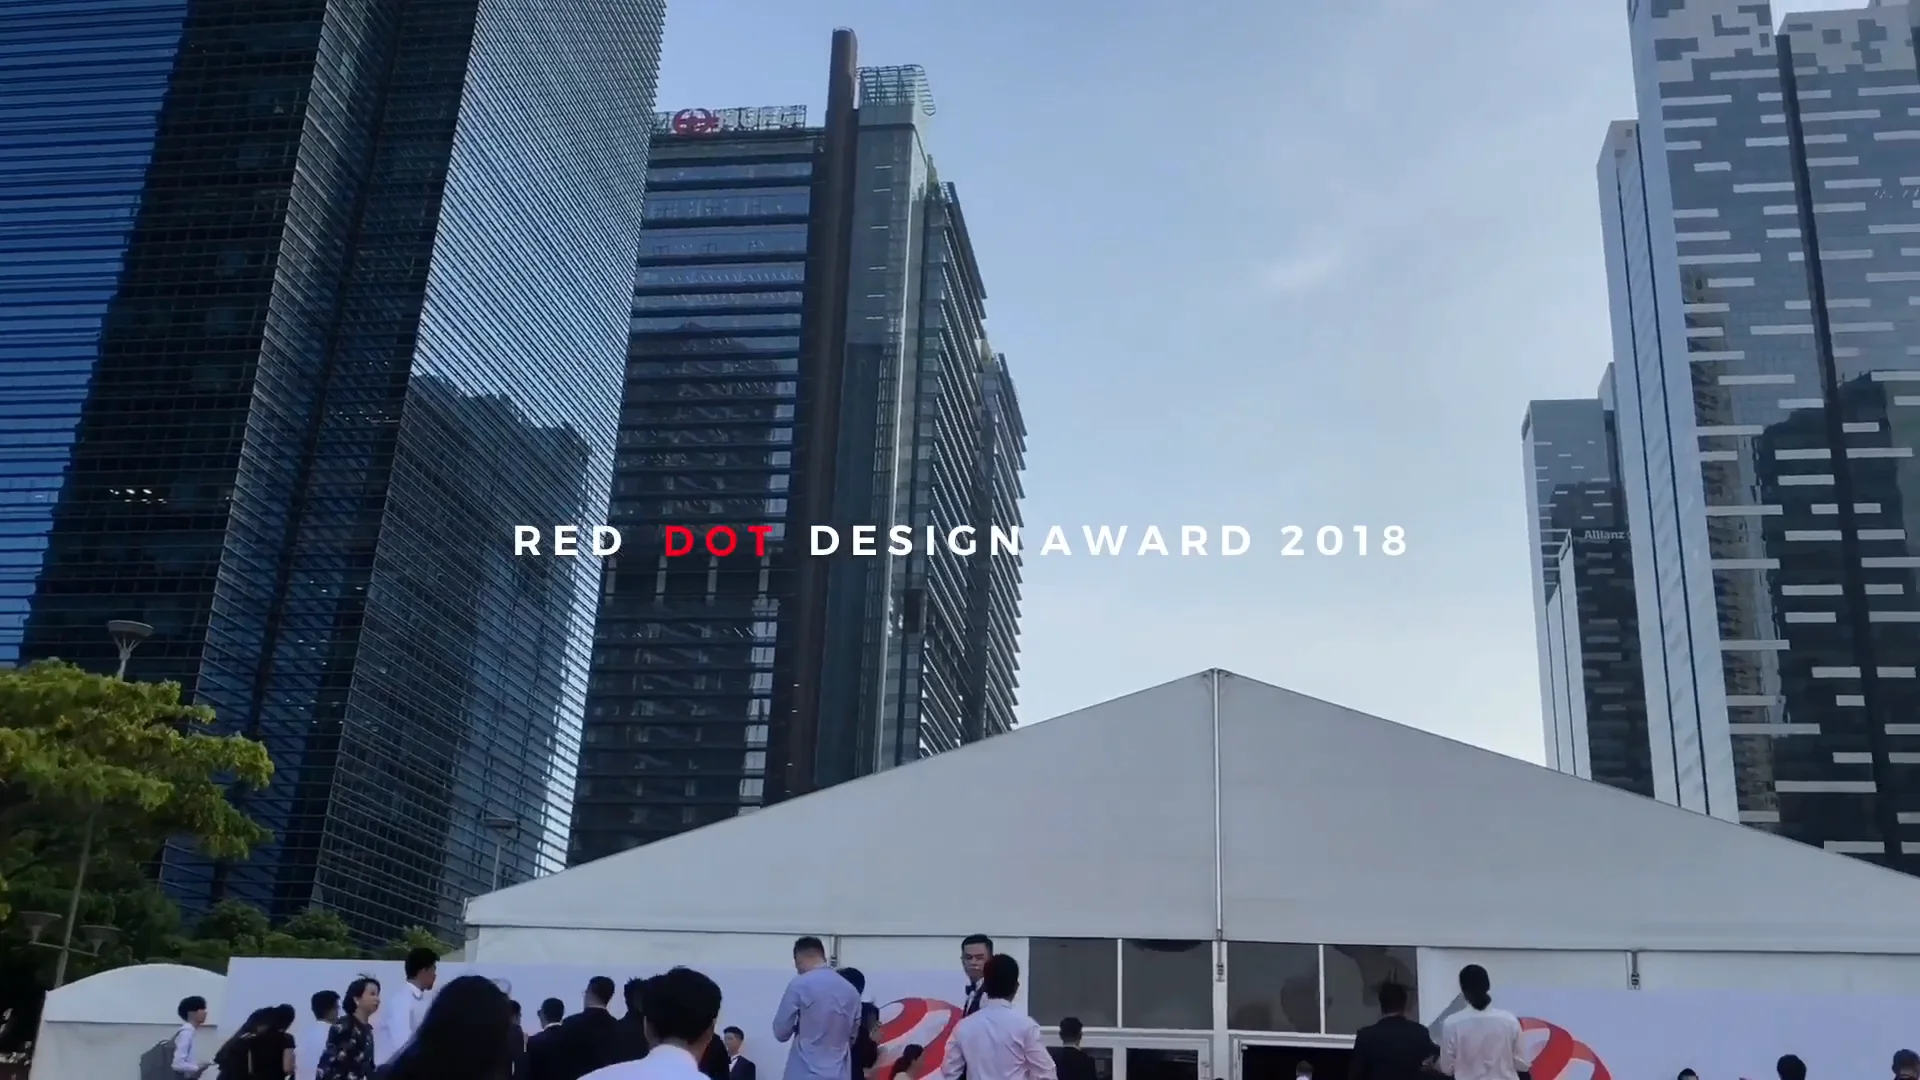 Red Dot Award: Design Concept - The Cooking Totem on Vimeo